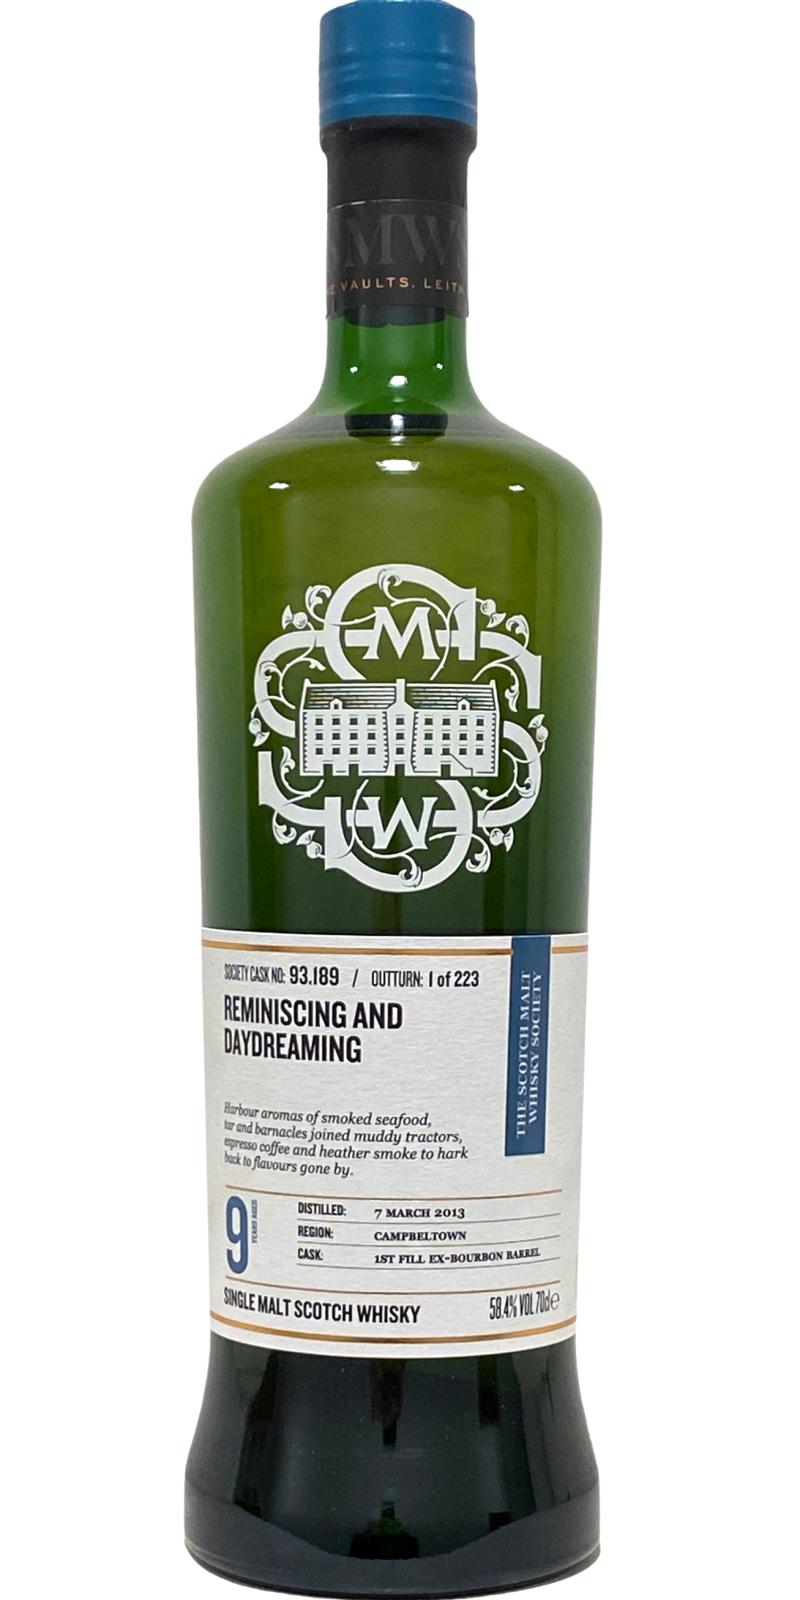 Glen Scotia 2013 SMWS 93.189 Reminiscing and daydreaming 1st Fill Ex-Bourbon Barrel 58.4% 700ml